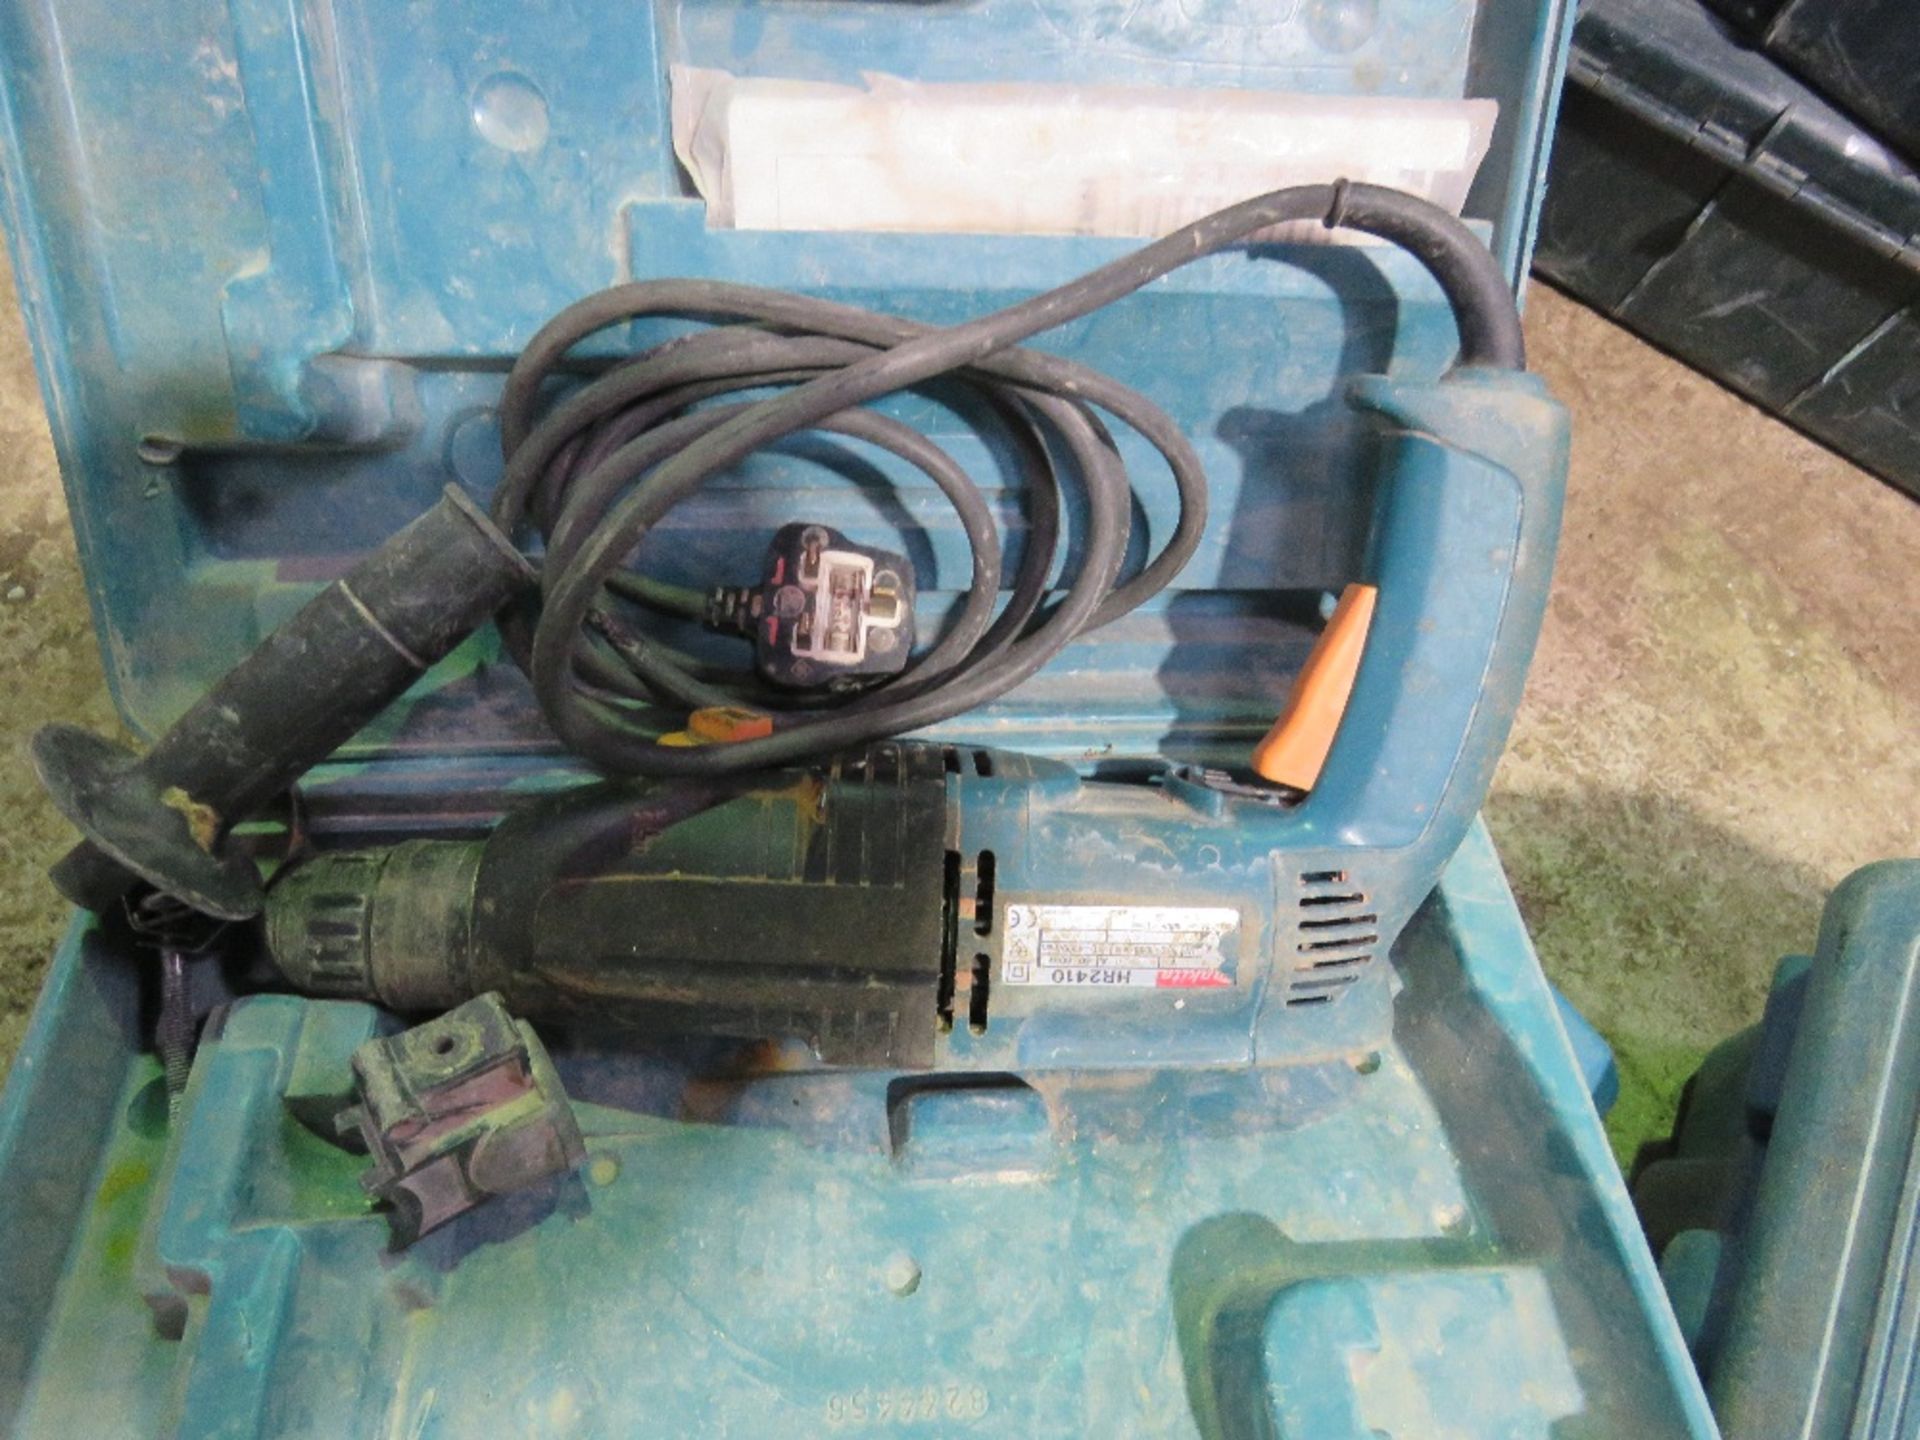 4 X POWER TOOLS, MAY BE INCOMPLETE: GRINDER PLUS 3NO DRILLS. - Image 7 of 9